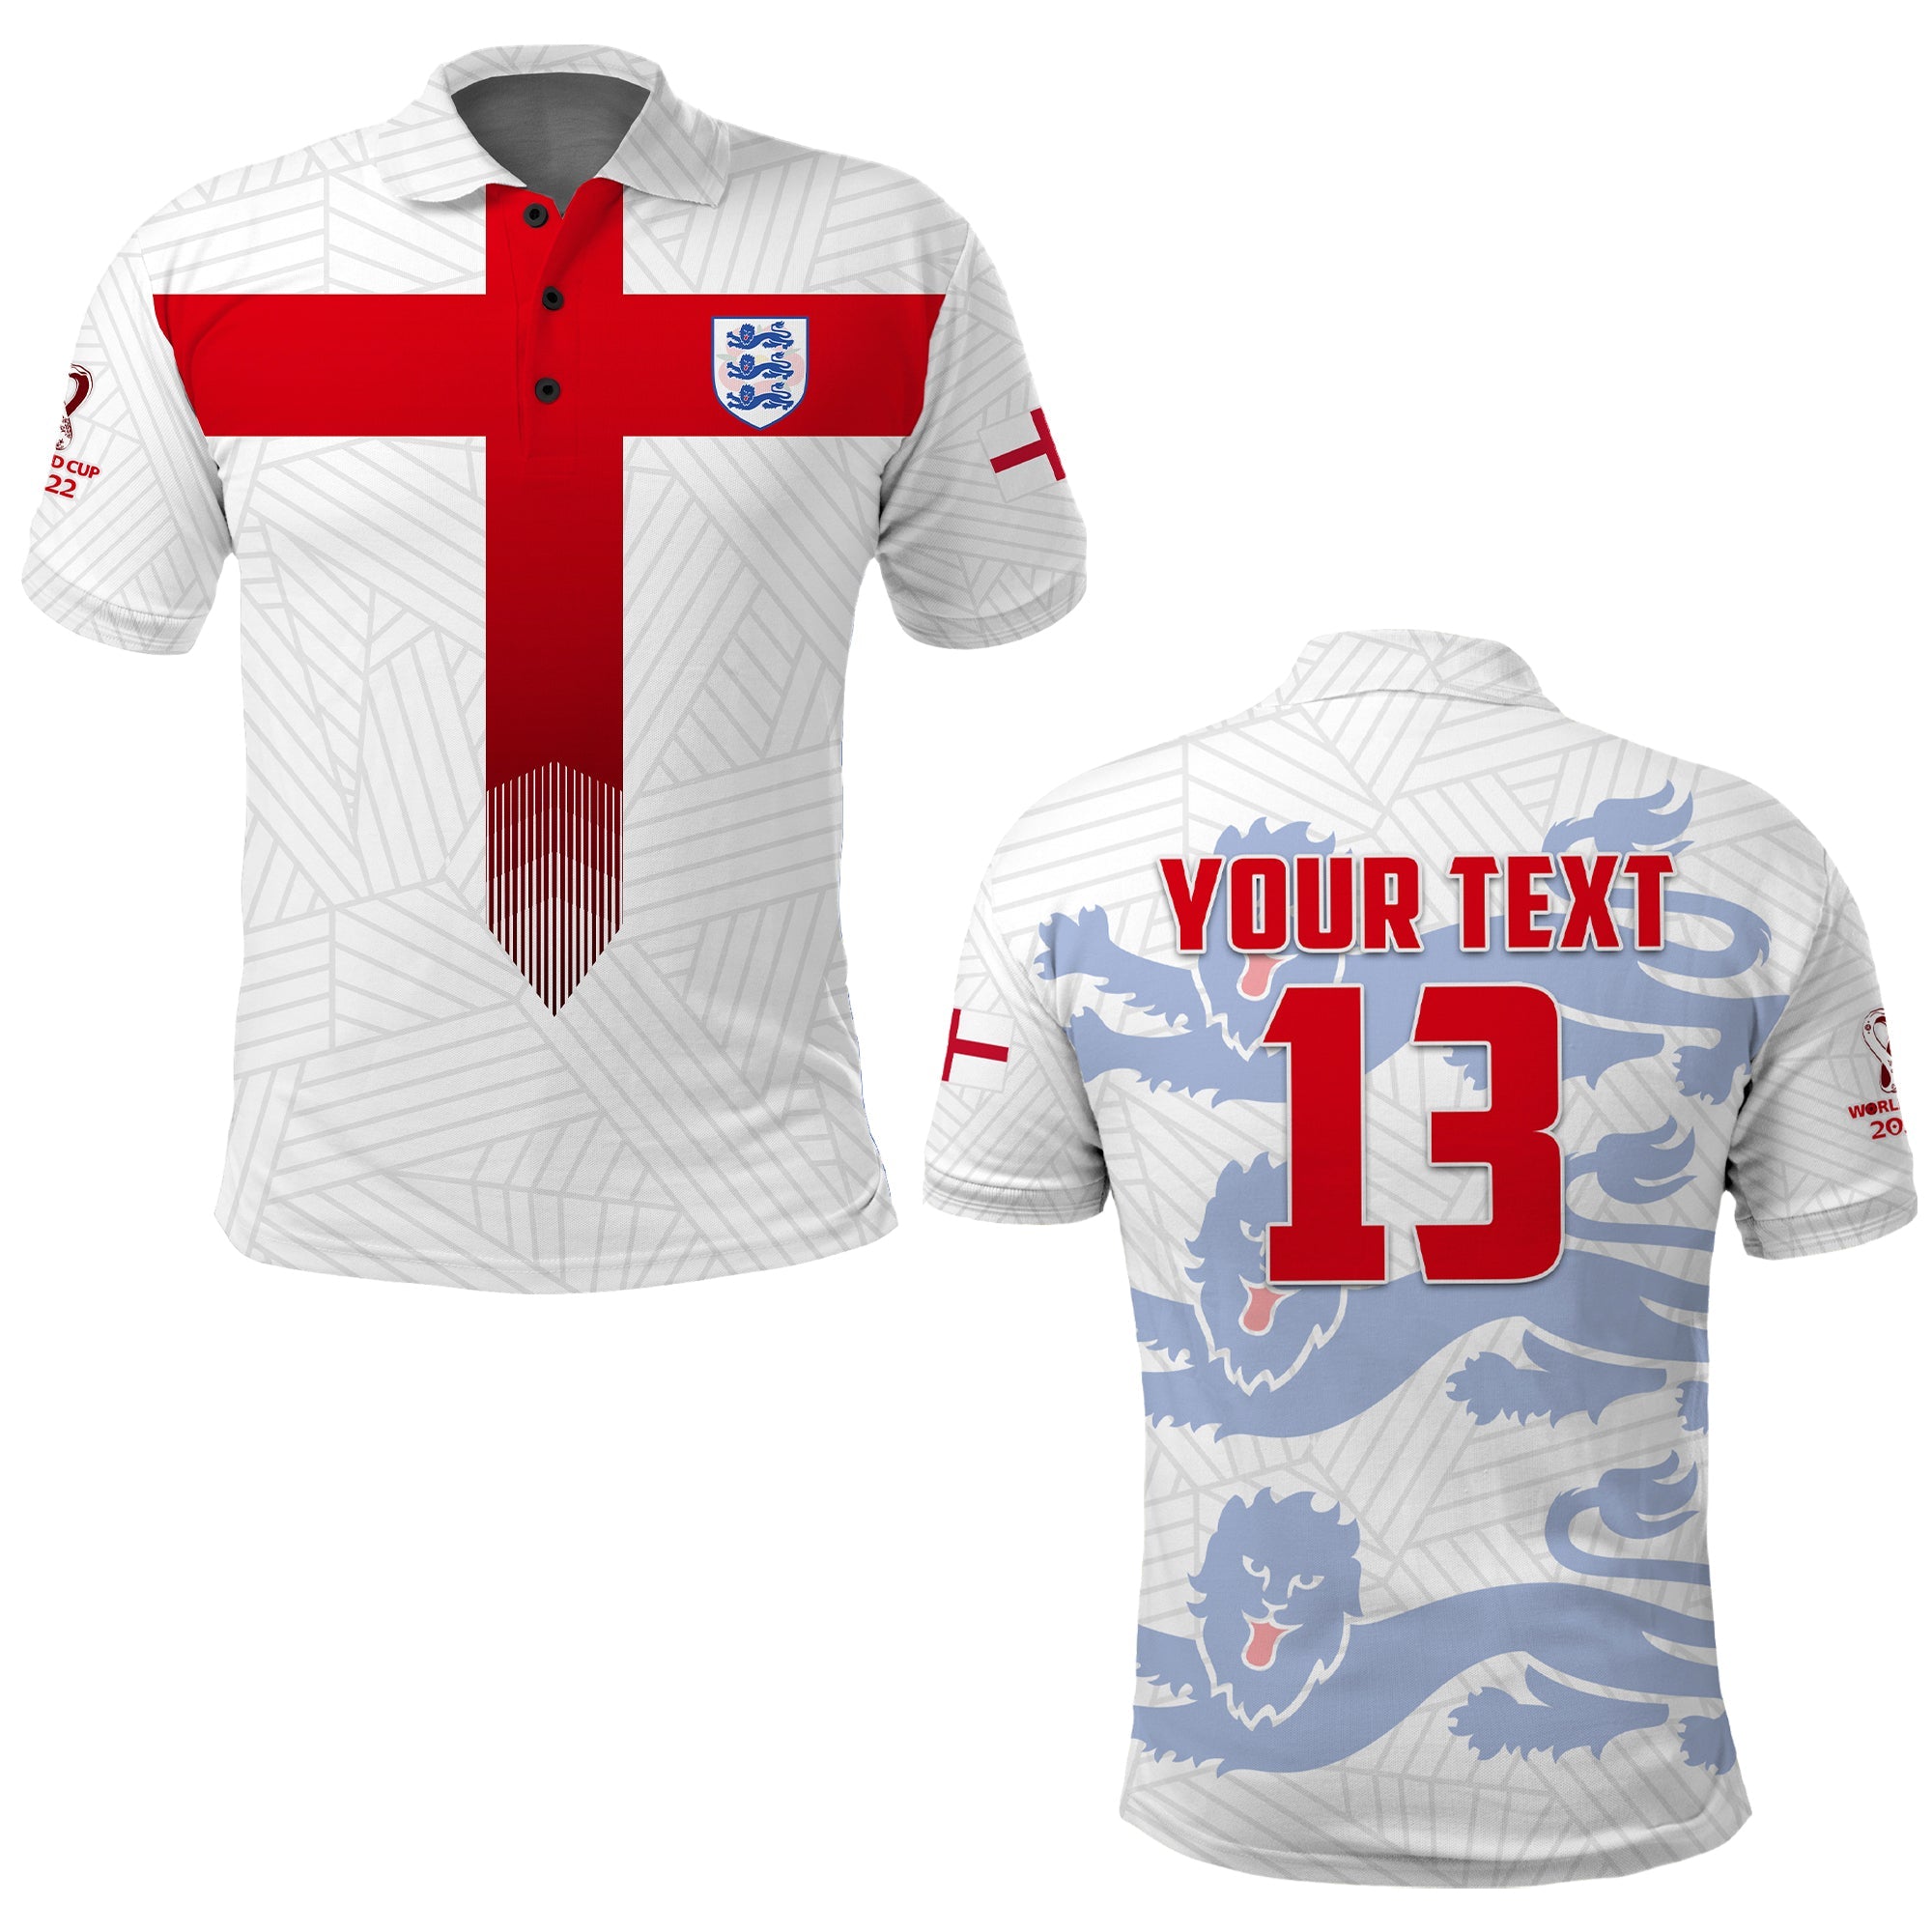 custom-text-and-number-england-football-polo-shirt-come-on-three-lions-soccer-champions-wolrd-cup-ver01